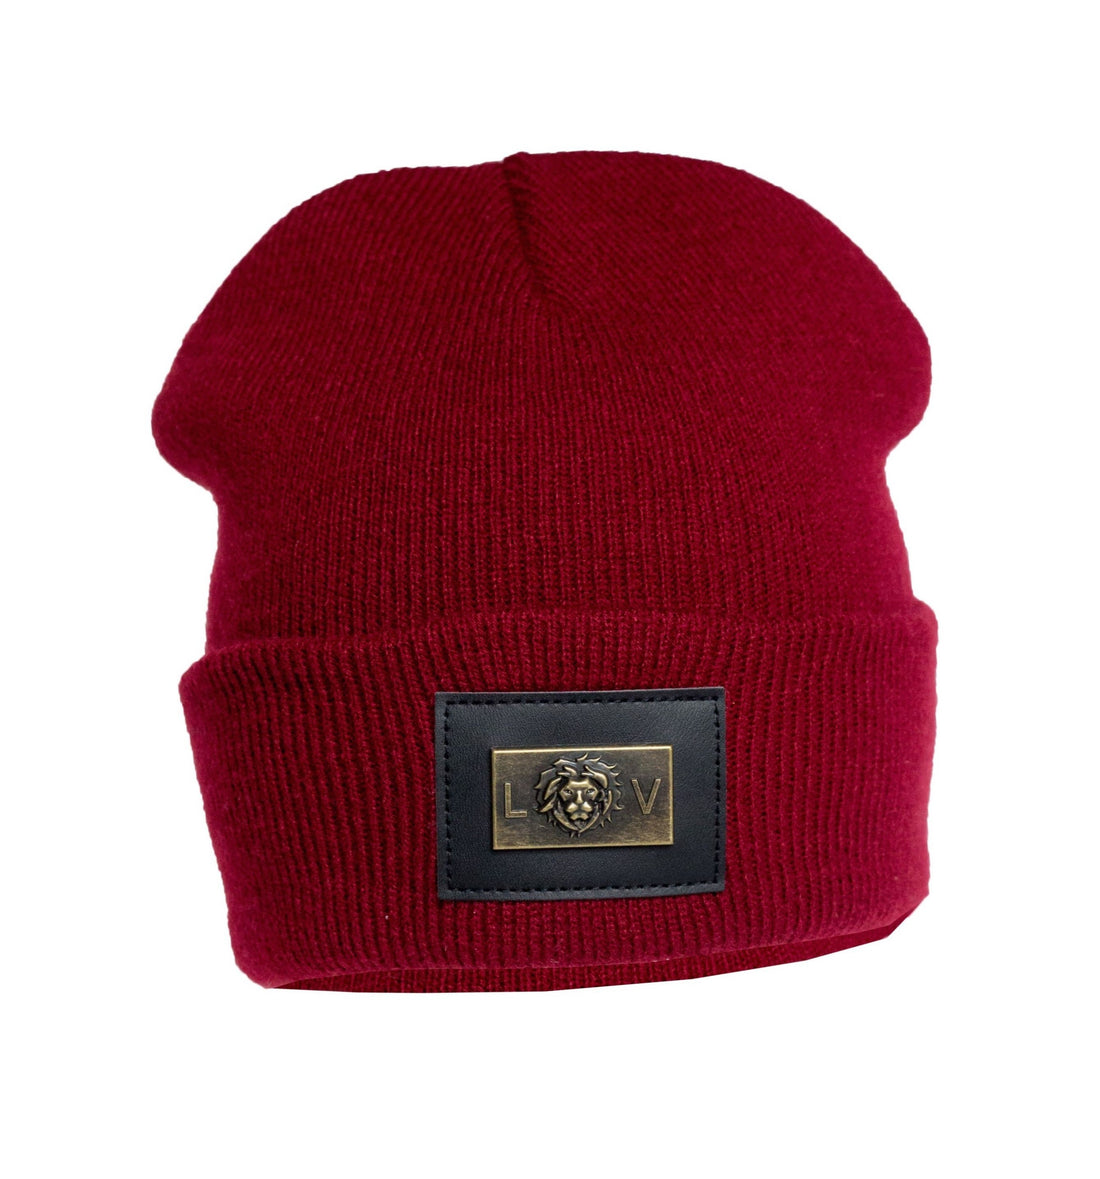 The LV Beanie - Red